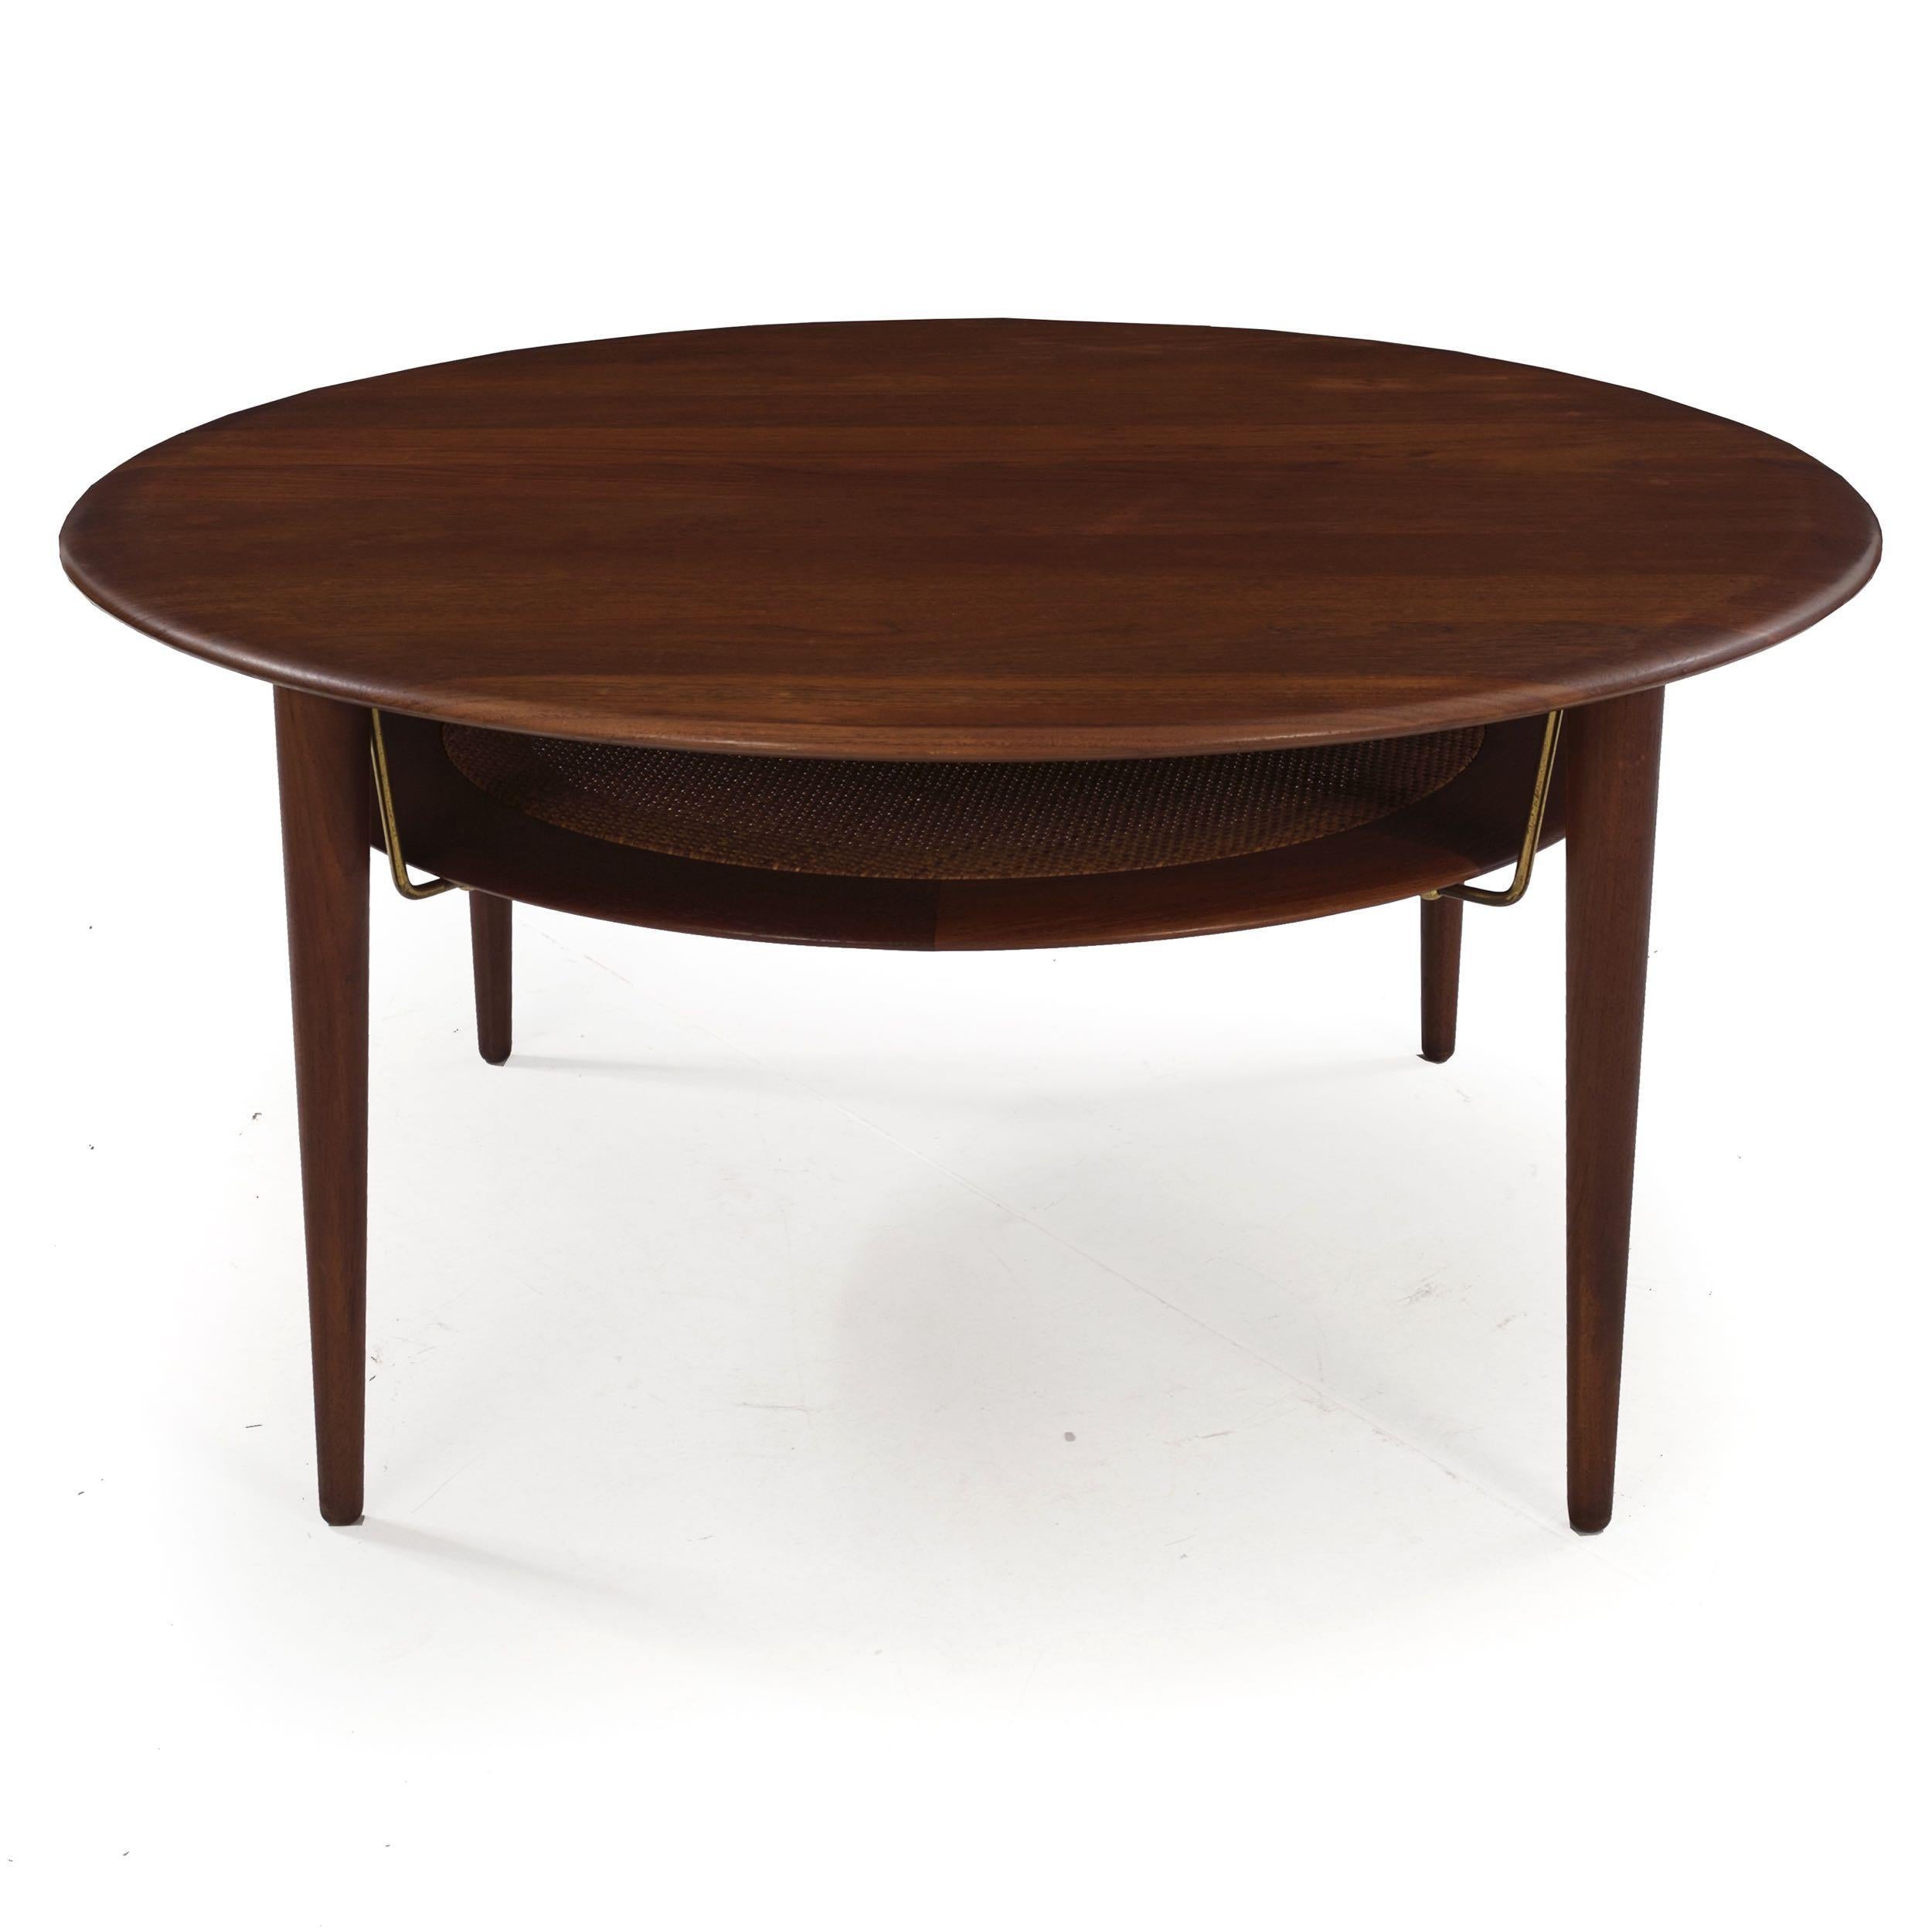 A delightful two-tiered coffee table designed by Peter Hvidt and Orla Mølgaard Nielsen in the 1950s for manufacture by France & Daverkosen, it features a solid teak overall circular profile with a mid-shelf of framed woven wicker surrounded by a